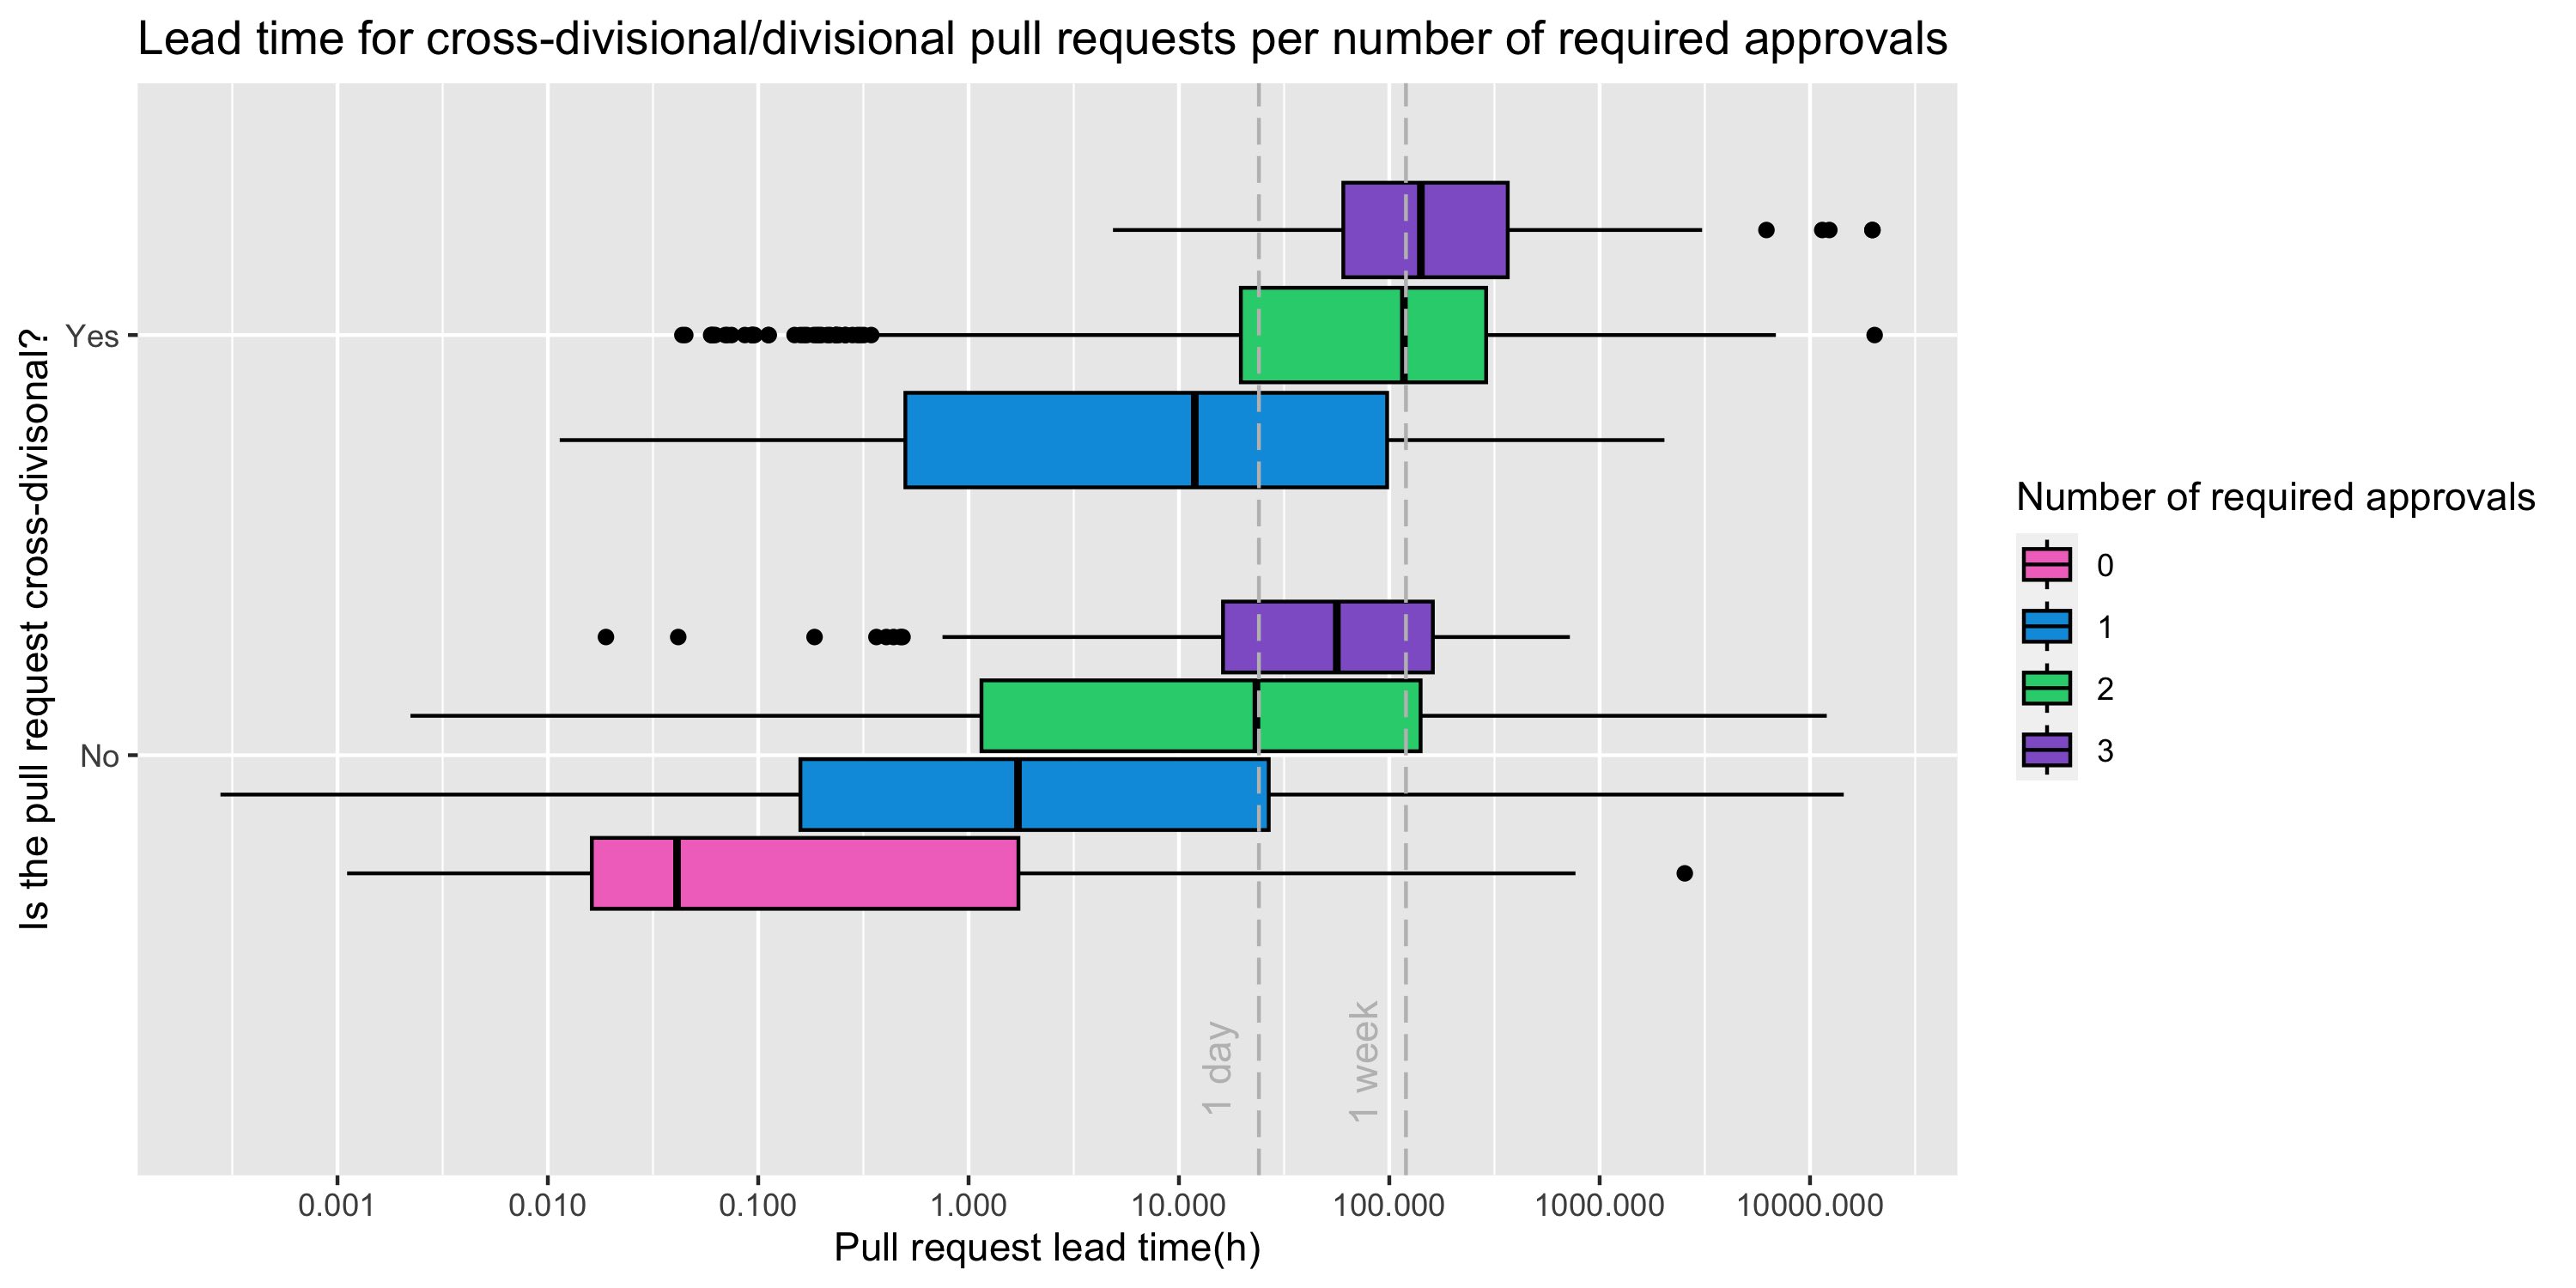 Lead time for cross-divisional/divisional pull request per number of approvals required